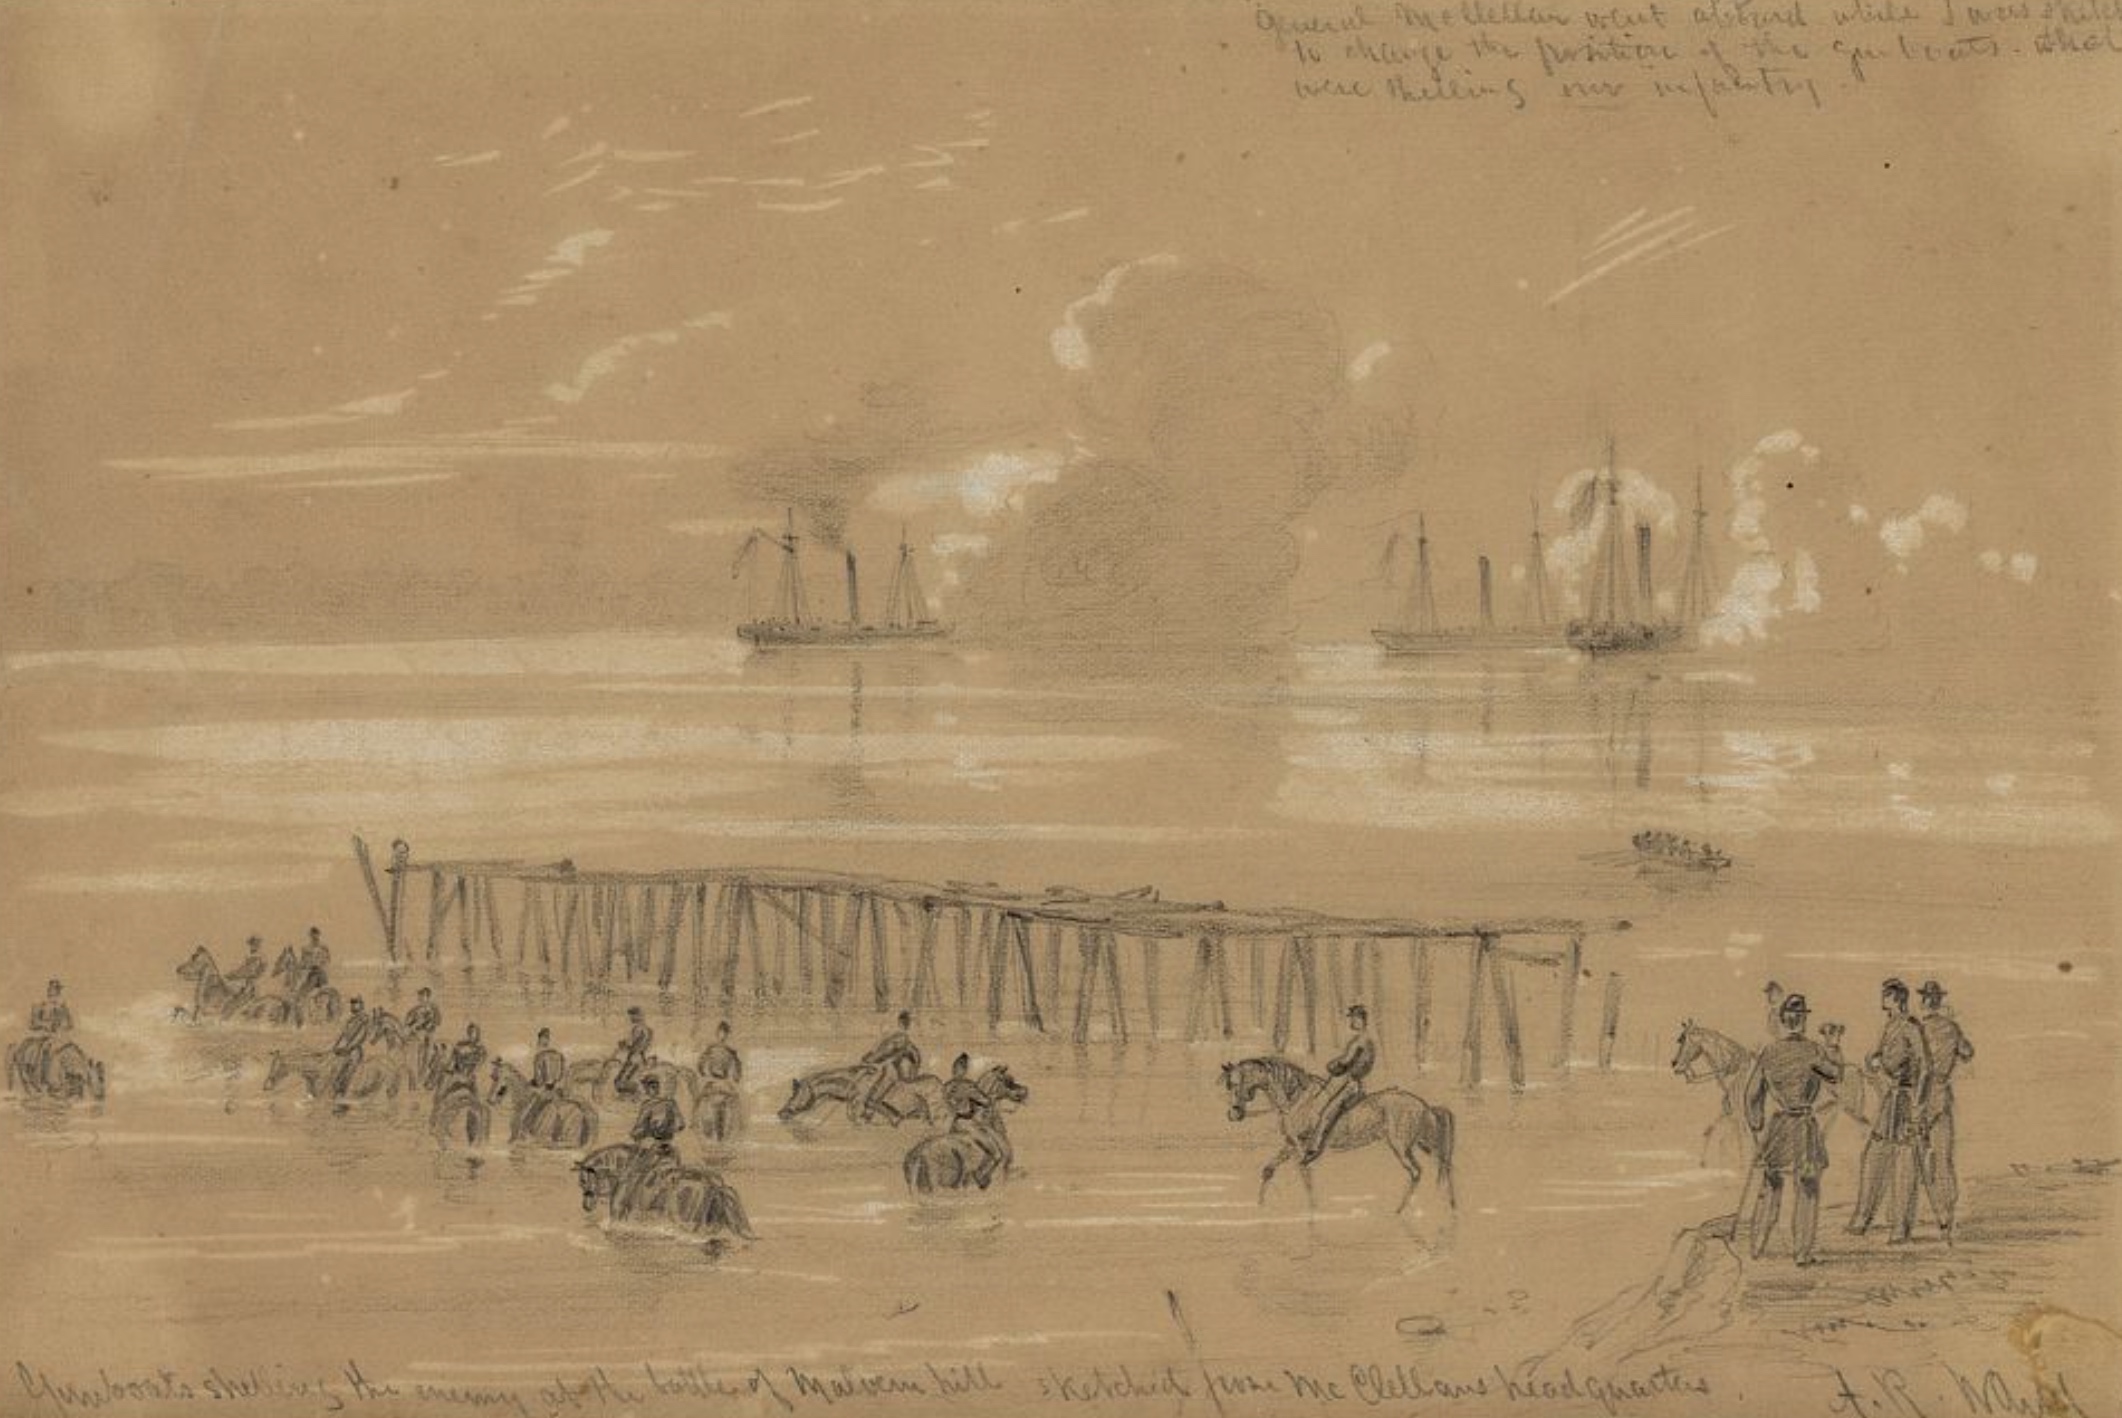 Union gunboats at the Battle of Malvern Hill